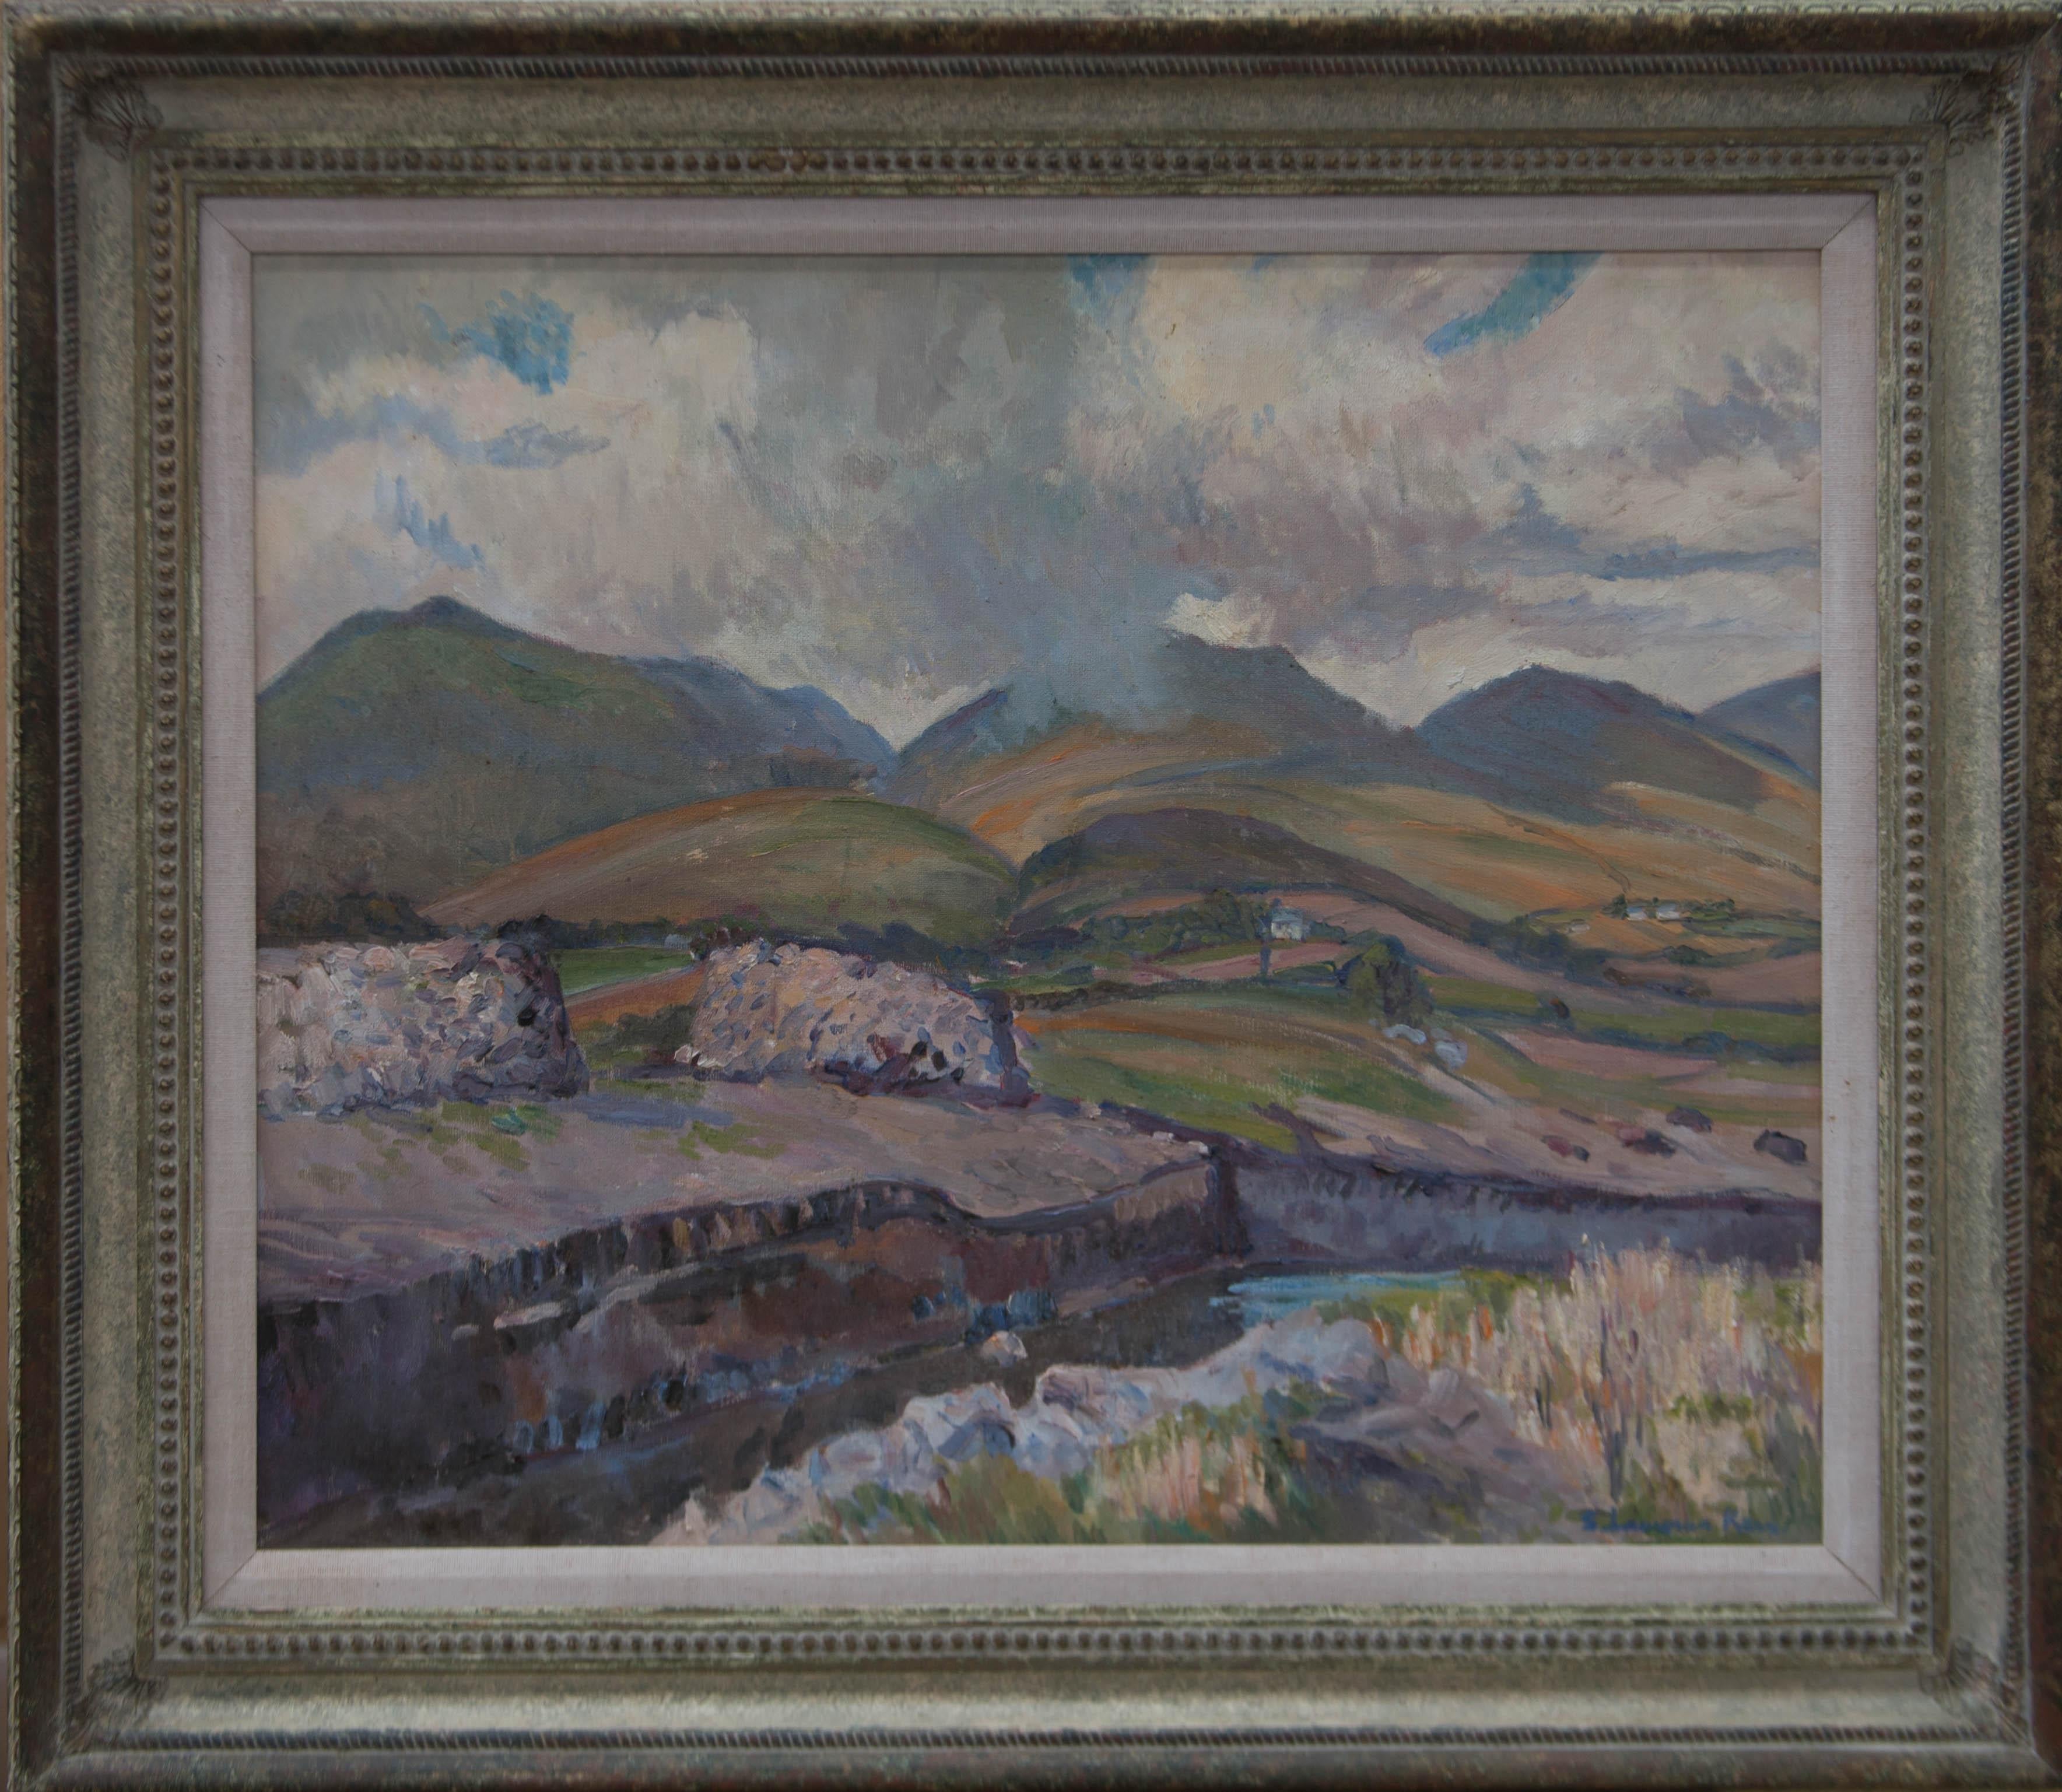 An expressive and captivating oil painting by the British artist Elizabeth Lamorna Kerr. The scene depicts a cloudy landscape view with mountains and a bog, a wetland that accumulates peat. This wonderful impressionistic composition, with clear